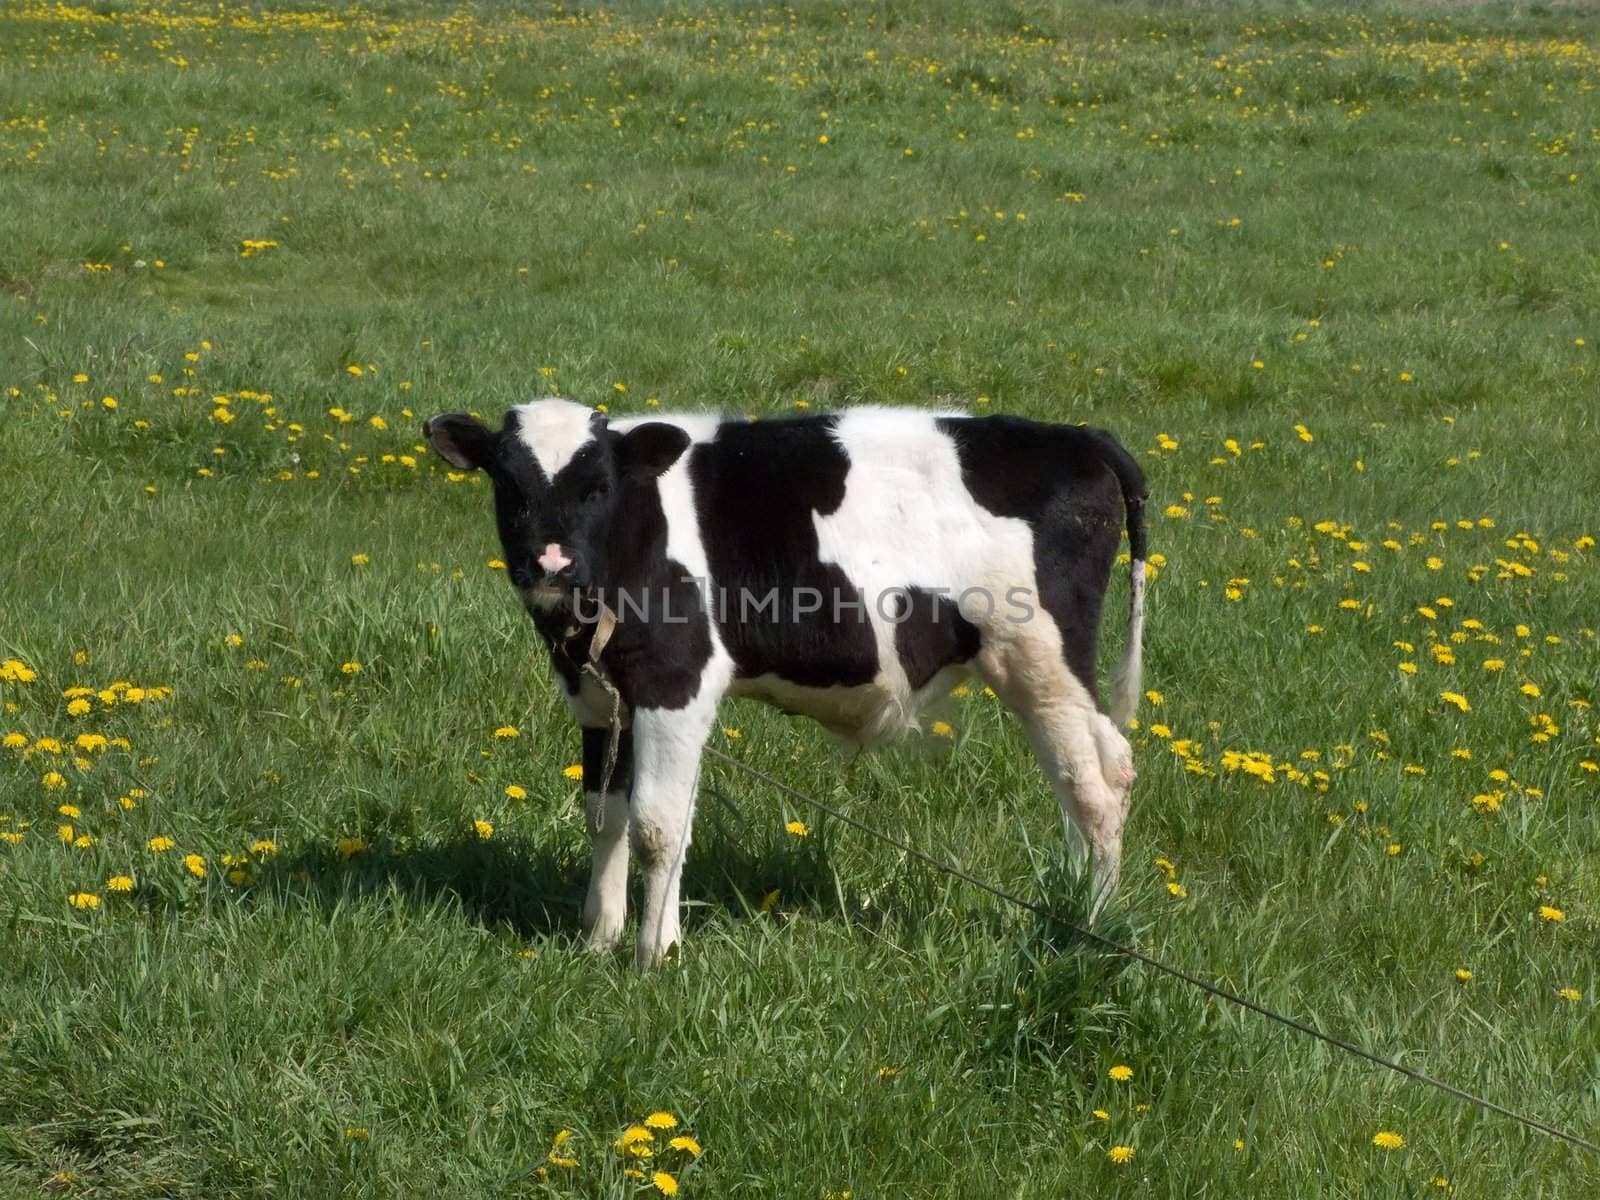 The black and white cow on a summer meadow 